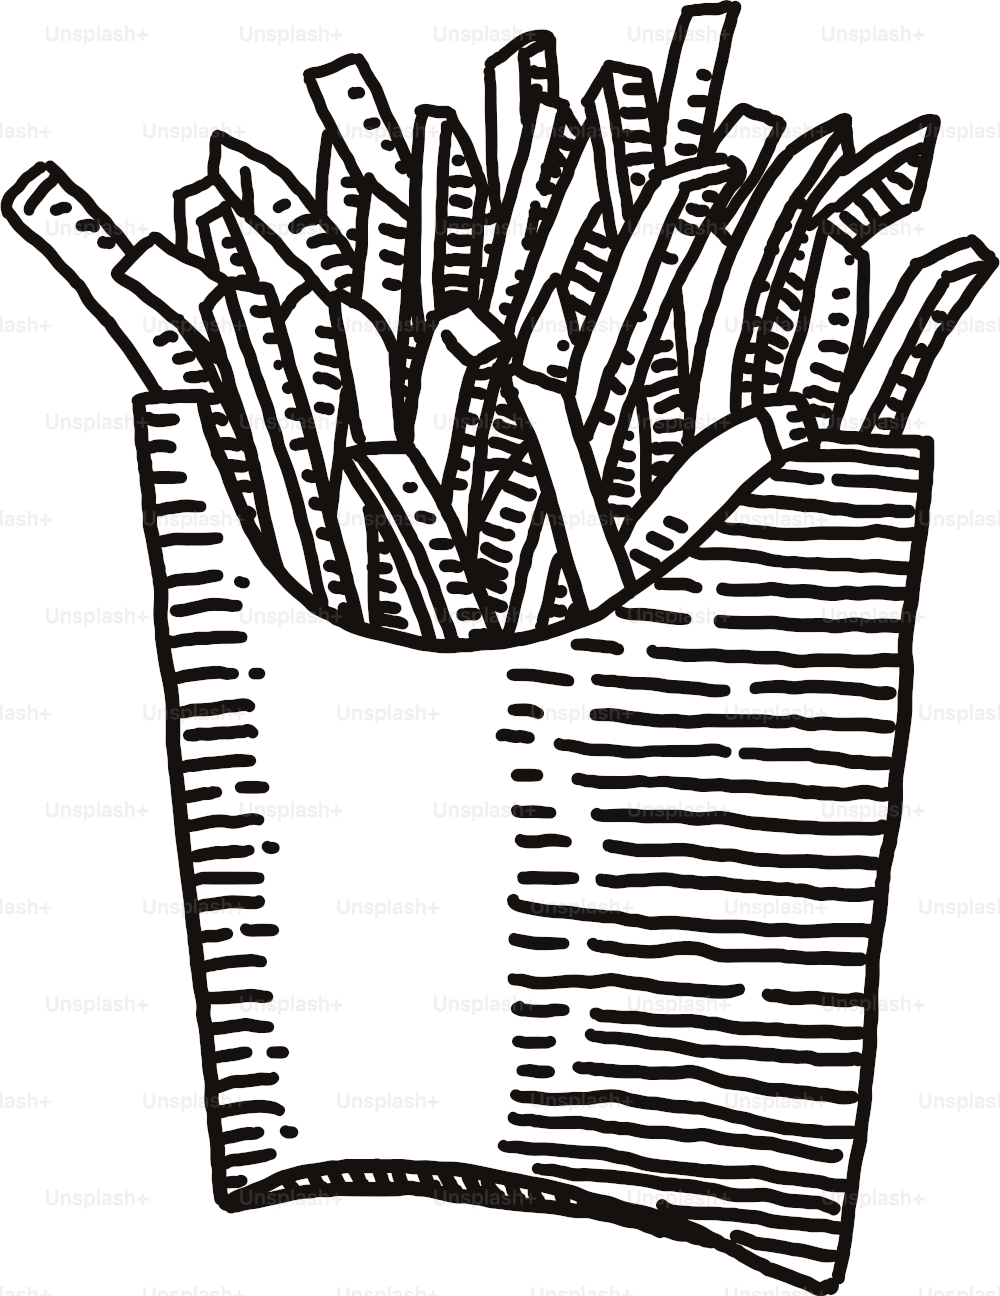 Simple, vector drawing of a pack of french fries